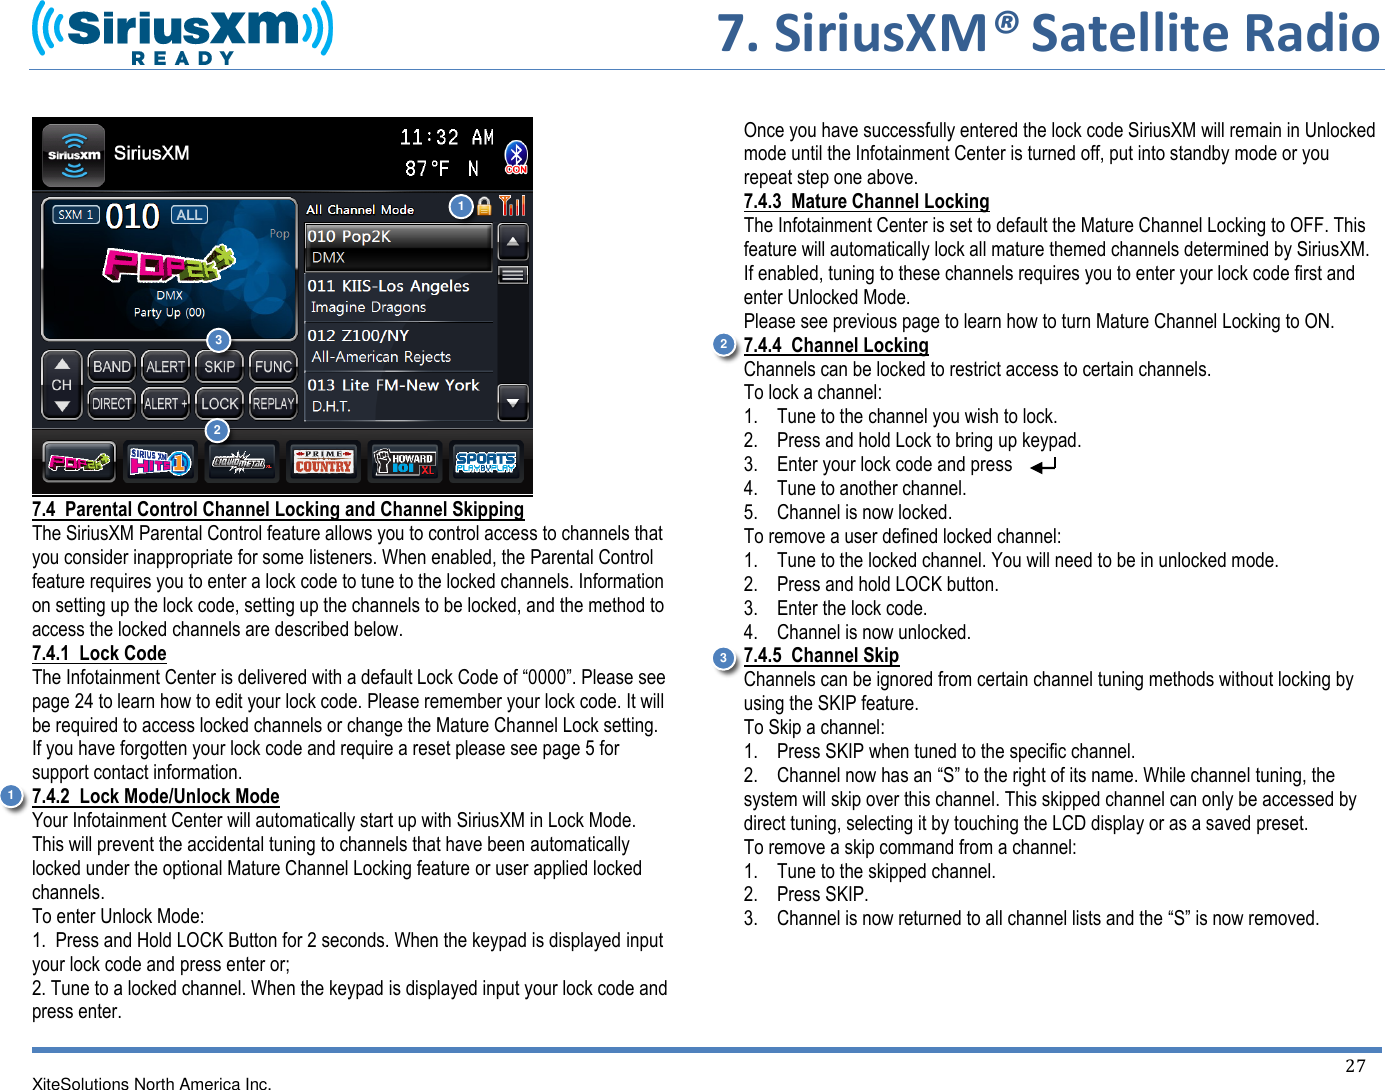     7. SiriusXM® Satellite Radio   XiteSolutions North America Inc.  27    7.4  Parental Control Channel Locking and Channel Skipping The SiriusXM Parental Control feature allows you to control access to channels that you consider inappropriate for some listeners. When enabled, the Parental Control feature requires you to enter a lock code to tune to the locked channels. Information on setting up the lock code, setting up the channels to be locked, and the method to access the locked channels are described below. 7.4.1  Lock Code The Infotainment Center is delivered with a default Lock Code of “0000”. Please see page 24 to learn how to edit your lock code. Please remember your lock code. It will be required to access locked channels or change the Mature Channel Lock setting. If you have forgotten your lock code and require a reset please see page 5 for support contact information. 7.4.2  Lock Mode/Unlock Mode Your Infotainment Center will automatically start up with SiriusXM in Lock Mode. This will prevent the accidental tuning to channels that have been automatically locked under the optional Mature Channel Locking feature or user applied locked channels. To enter Unlock Mode: 1.  Press and Hold LOCK Button for 2 seconds. When the keypad is displayed input your lock code and press enter or; 2. Tune to a locked channel. When the keypad is displayed input your lock code and press enter.   Once you have successfully entered the lock code SiriusXM will remain in Unlocked mode until the Infotainment Center is turned off, put into standby mode or you repeat step one above. 7.4.3  Mature Channel Locking The Infotainment Center is set to default the Mature Channel Locking to OFF. This feature will automatically lock all mature themed channels determined by SiriusXM. If enabled, tuning to these channels requires you to enter your lock code first and enter Unlocked Mode. Please see previous page to learn how to turn Mature Channel Locking to ON.  7.4.4  Channel Locking Channels can be locked to restrict access to certain channels. To lock a channel: 1.    Tune to the channel you wish to lock. 2.    Press and hold Lock to bring up keypad. 3.    Enter your lock code and press 4.    Tune to another channel. 5.    Channel is now locked. To remove a user defined locked channel: 1.    Tune to the locked channel. You will need to be in unlocked mode.  2.    Press and hold LOCK button. 3.    Enter the lock code. 4.    Channel is now unlocked. 7.4.5  Channel Skip Channels can be ignored from certain channel tuning methods without locking by using the SKIP feature. To Skip a channel: 1.    Press SKIP when tuned to the specific channel. 2.    Channel now has an “S” to the right of its name. While channel tuning, the system will skip over this channel. This skipped channel can only be accessed by direct tuning, selecting it by touching the LCD display or as a saved preset. To remove a skip command from a channel: 1.    Tune to the skipped channel. 2.    Press SKIP. 3.    Channel is now returned to all channel lists and the “S” is now removed.1 2 3 1 2 3 